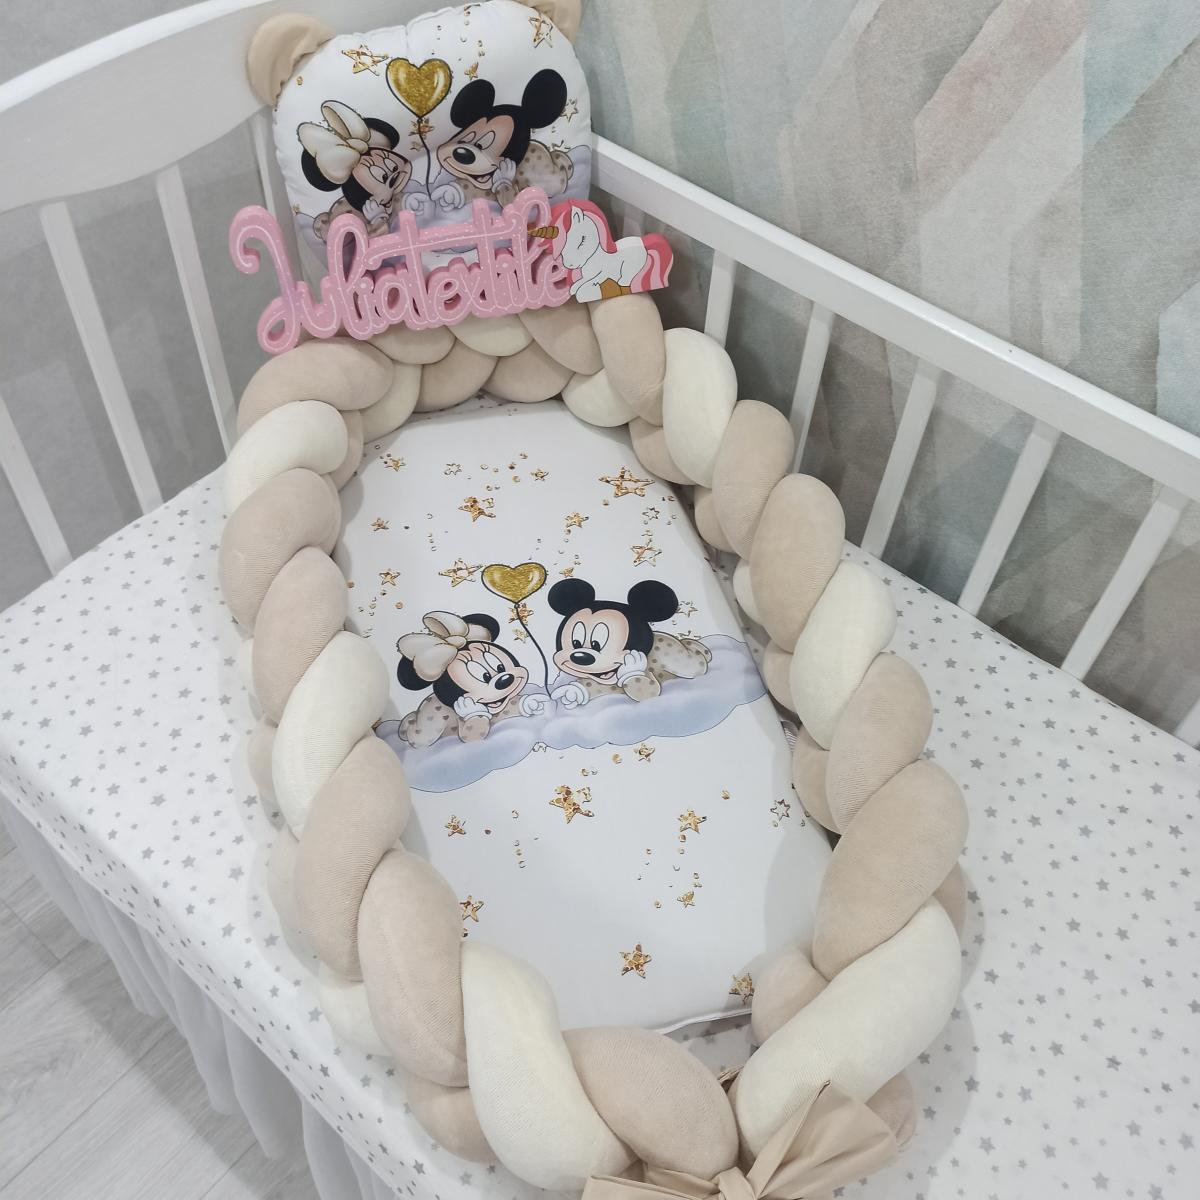 Sweet Welcome: Mickey and Minnie Mouse Braided Reducer for Unisex Babies